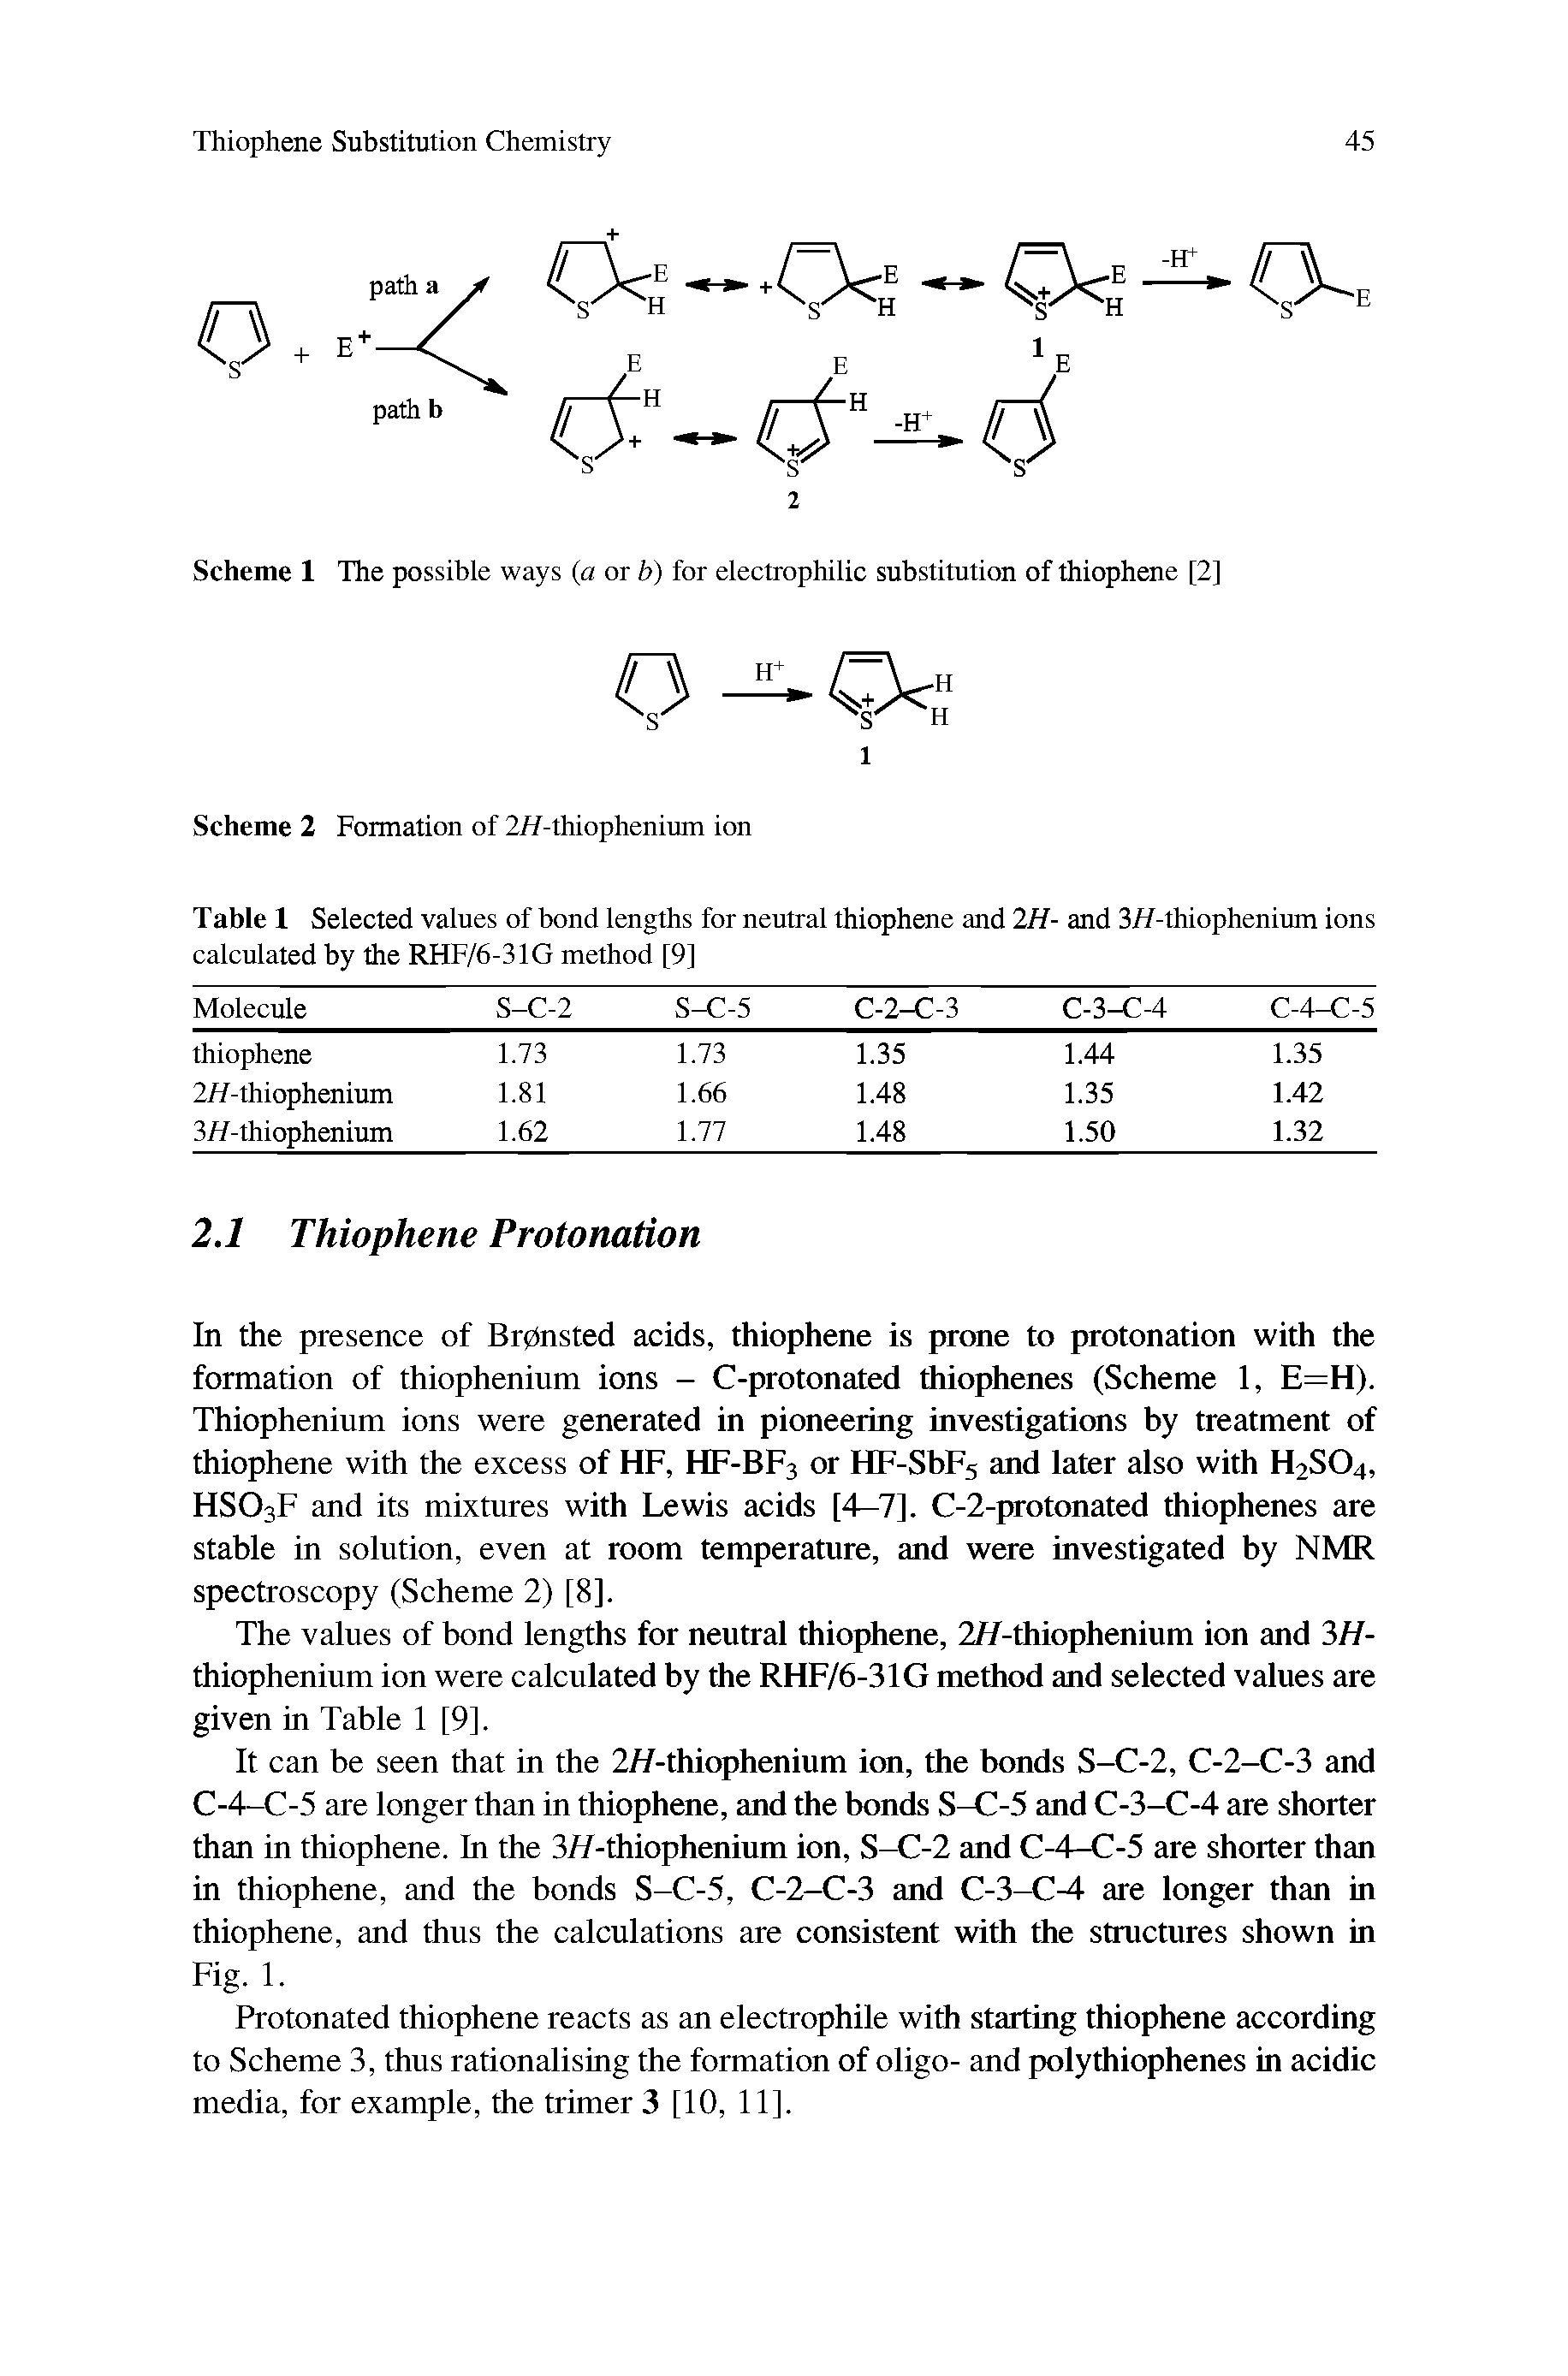 Scheme 1 The possible ways (a or b) for electrophilic substitution of thiophene [2]...